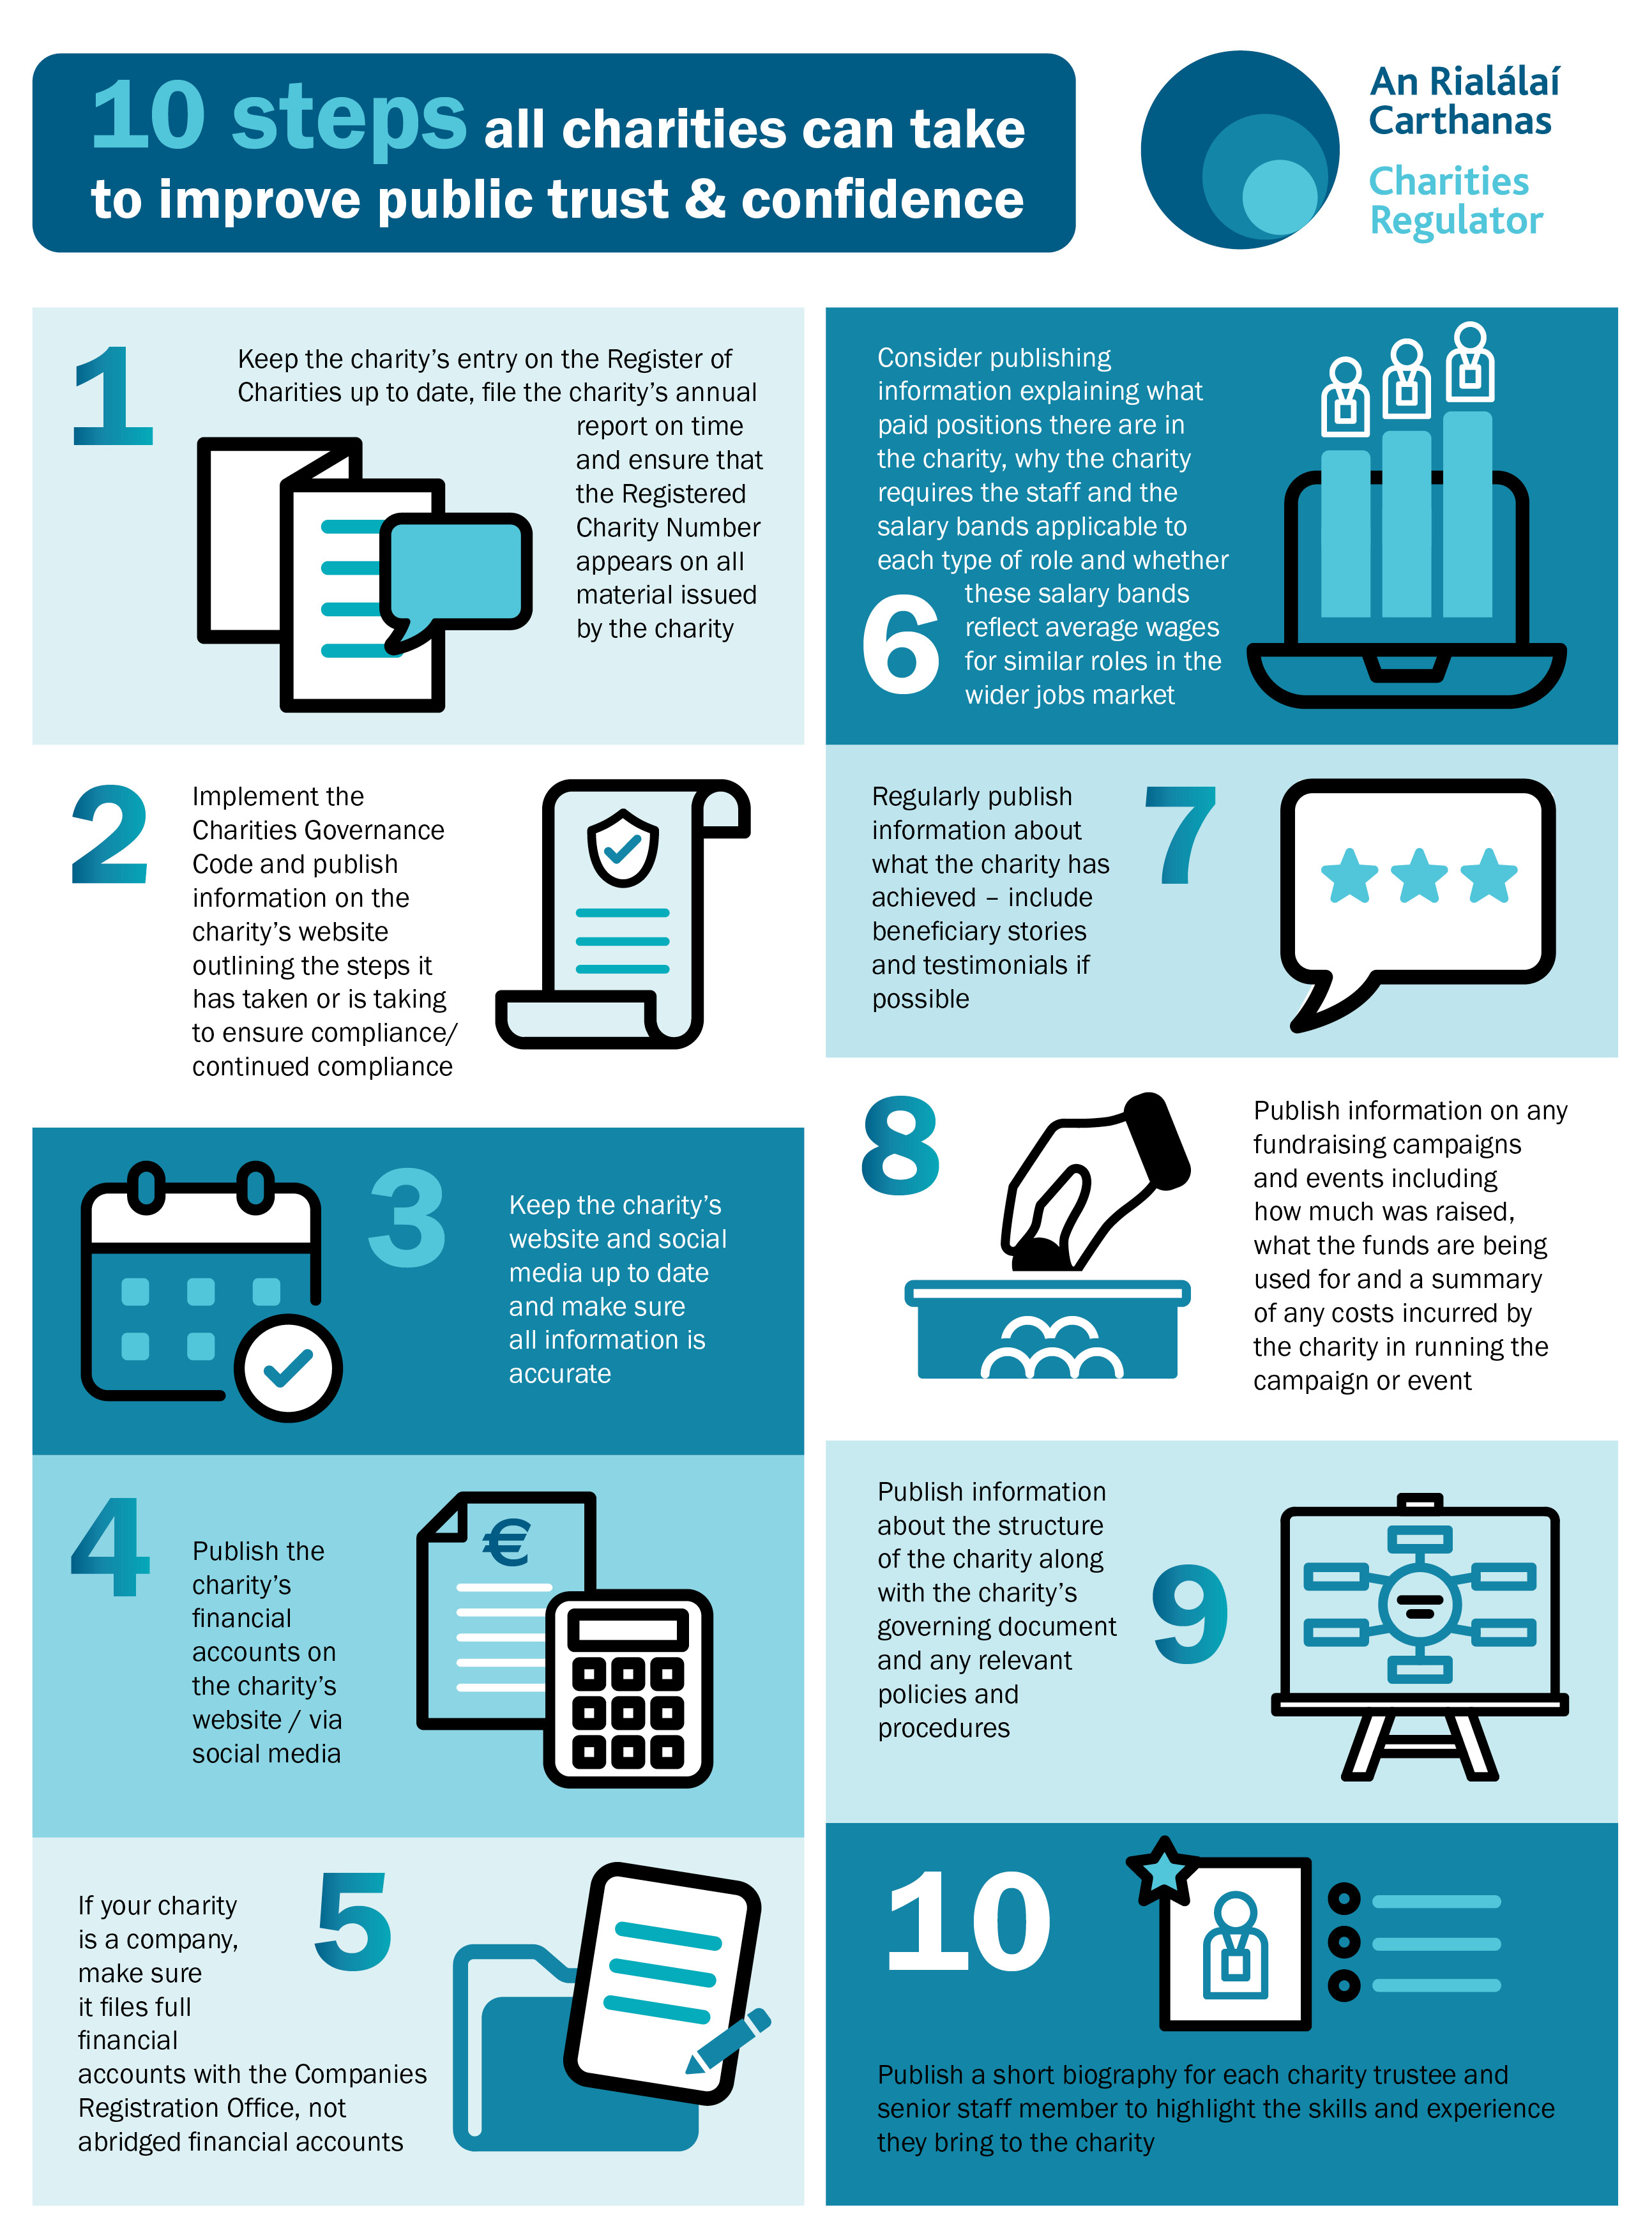 Infographic detailing 10 steps all charities can take to improve public trust and confidence